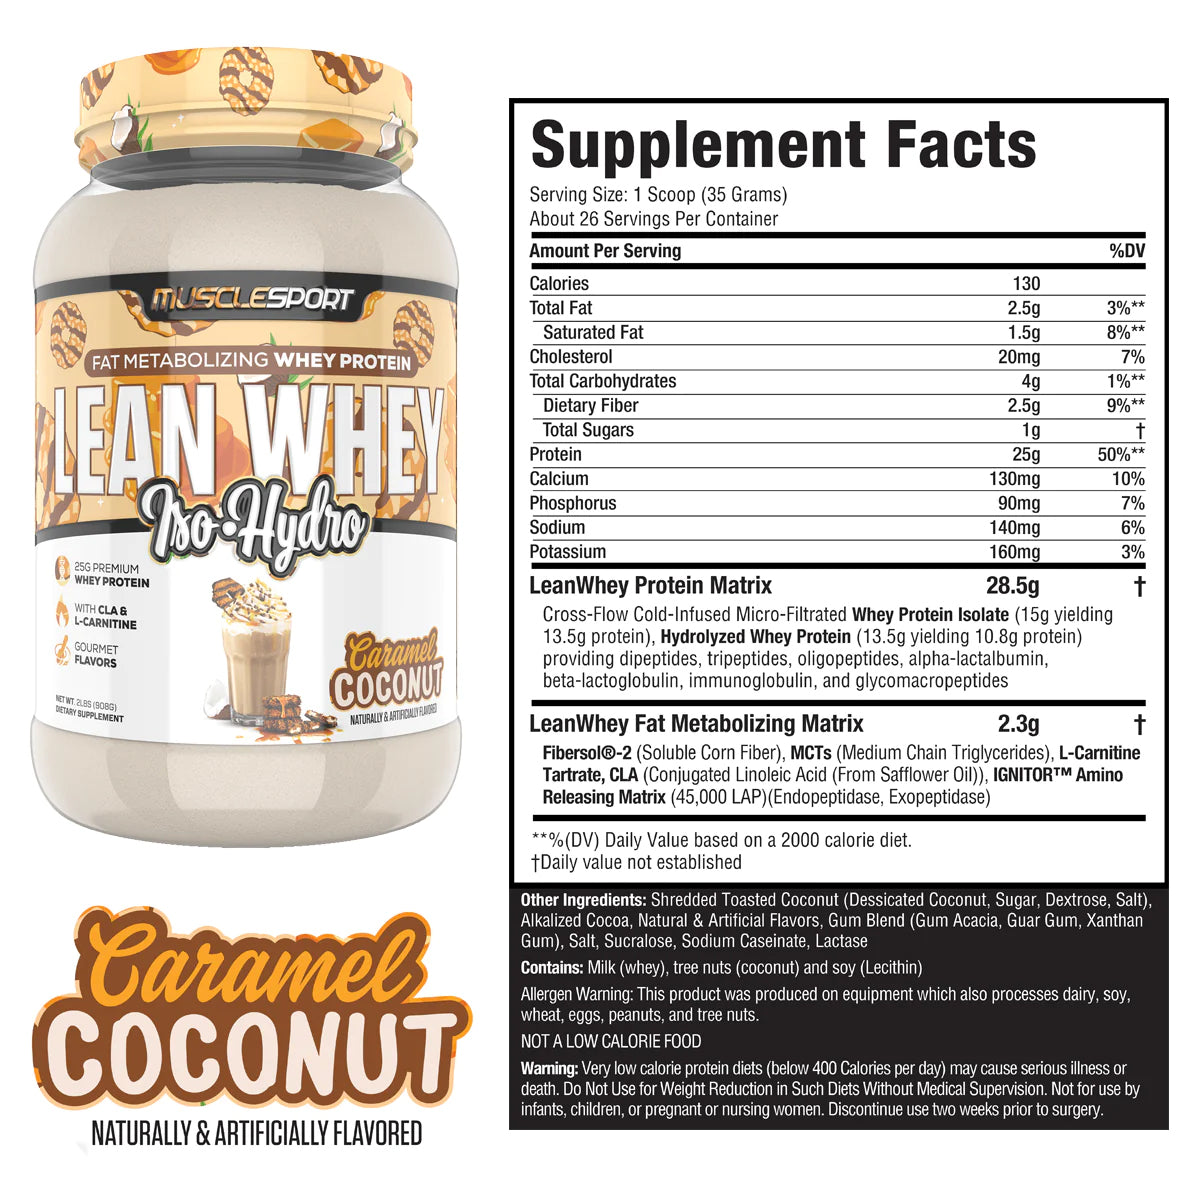 Caramel Coconut Lean Whey Supplement Facts